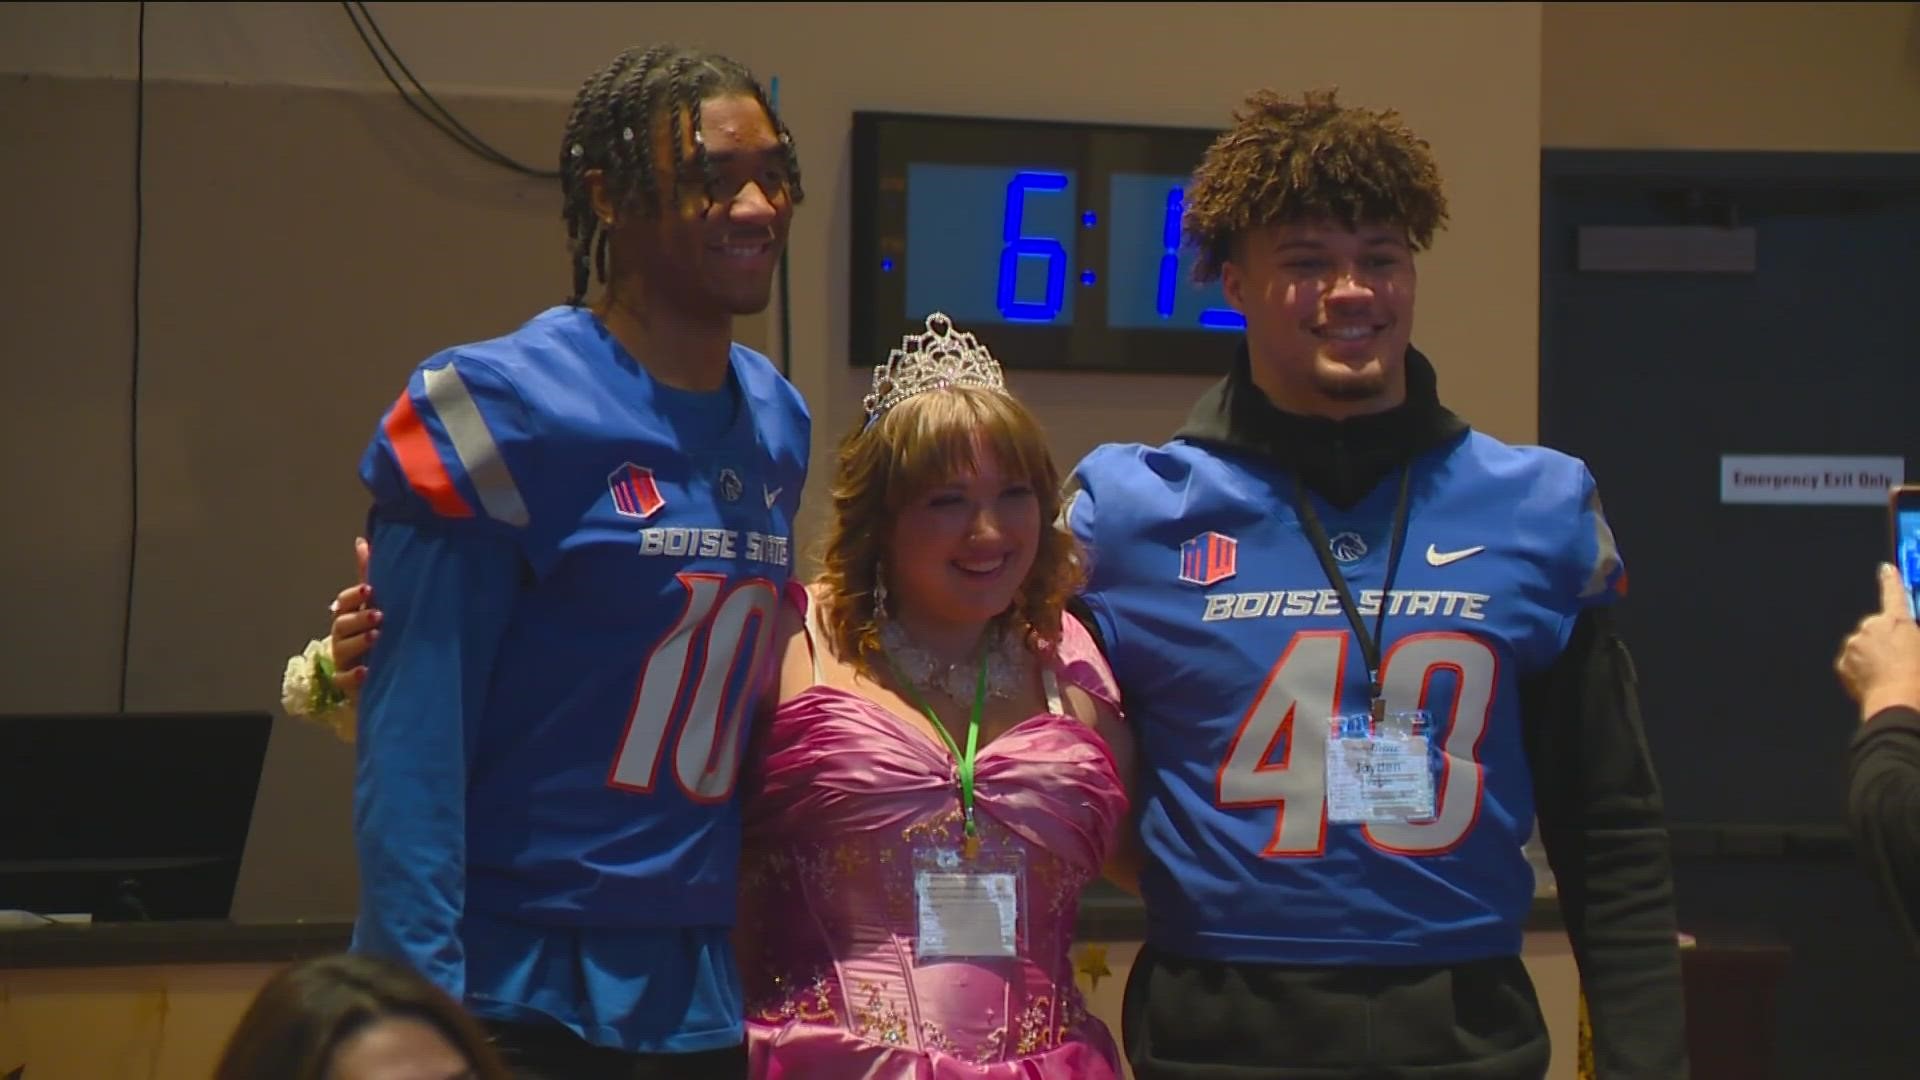 The Tim Tebow Foundation's Night to Shine prom was back in-person in Meridian Friday night, giving people with special needs an unforgettable experience.